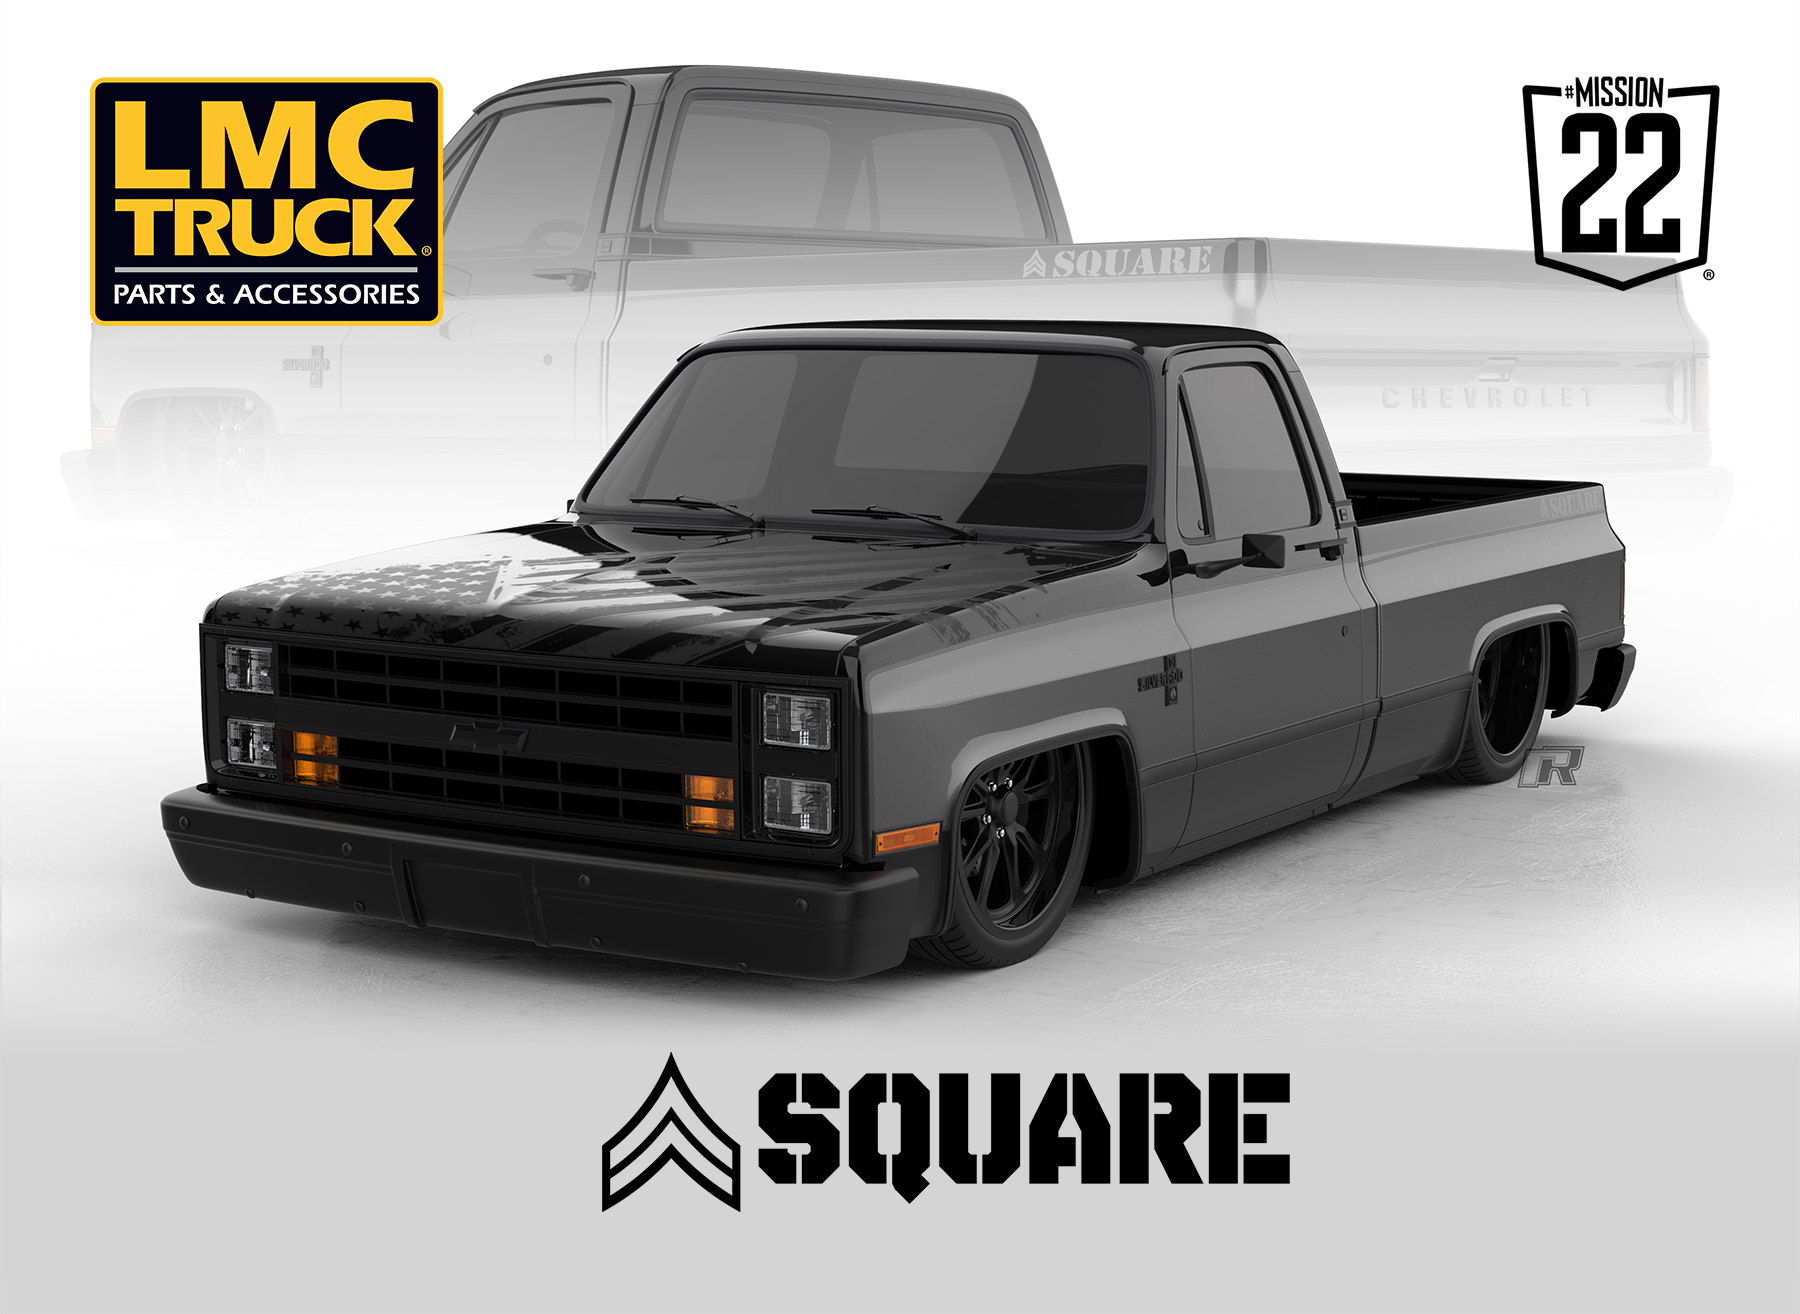 Sergeant Square - Mission 22 Charity Build with Street Trucks!